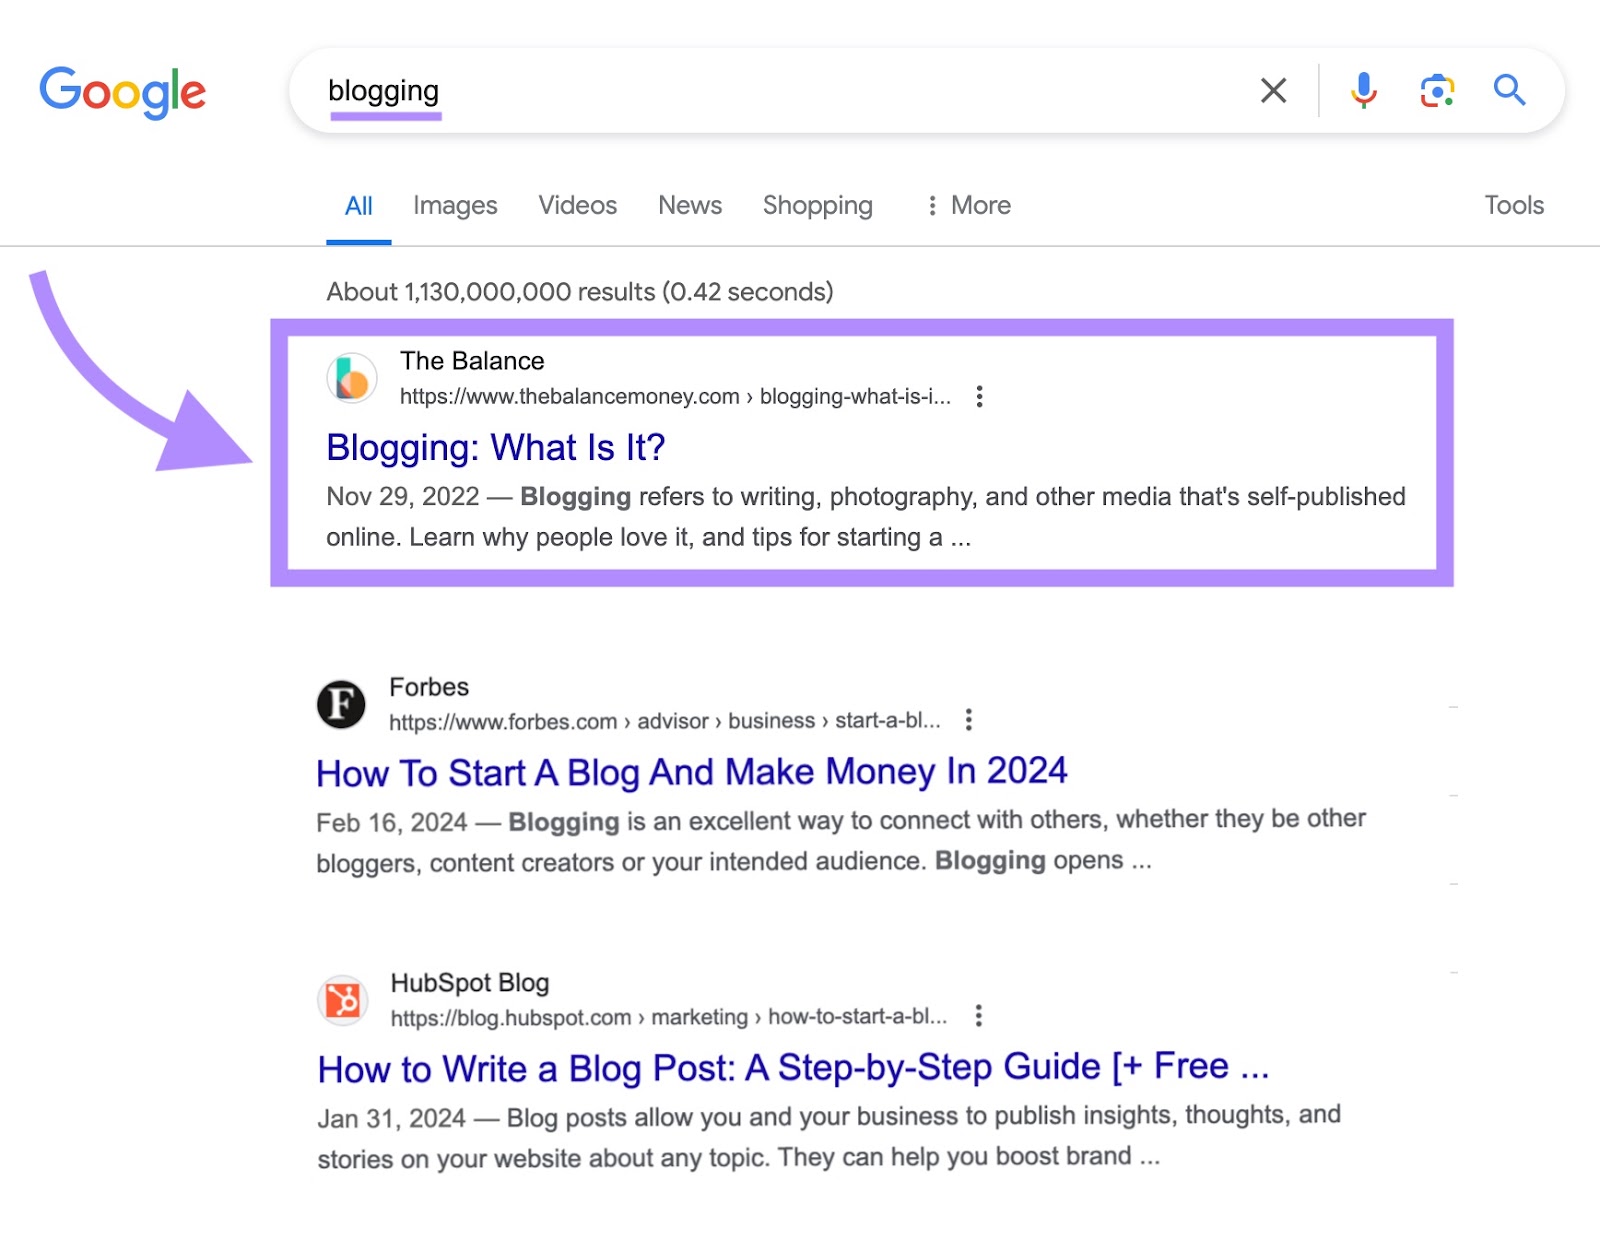 The Balance's blog post appears first in google results for "blogging"